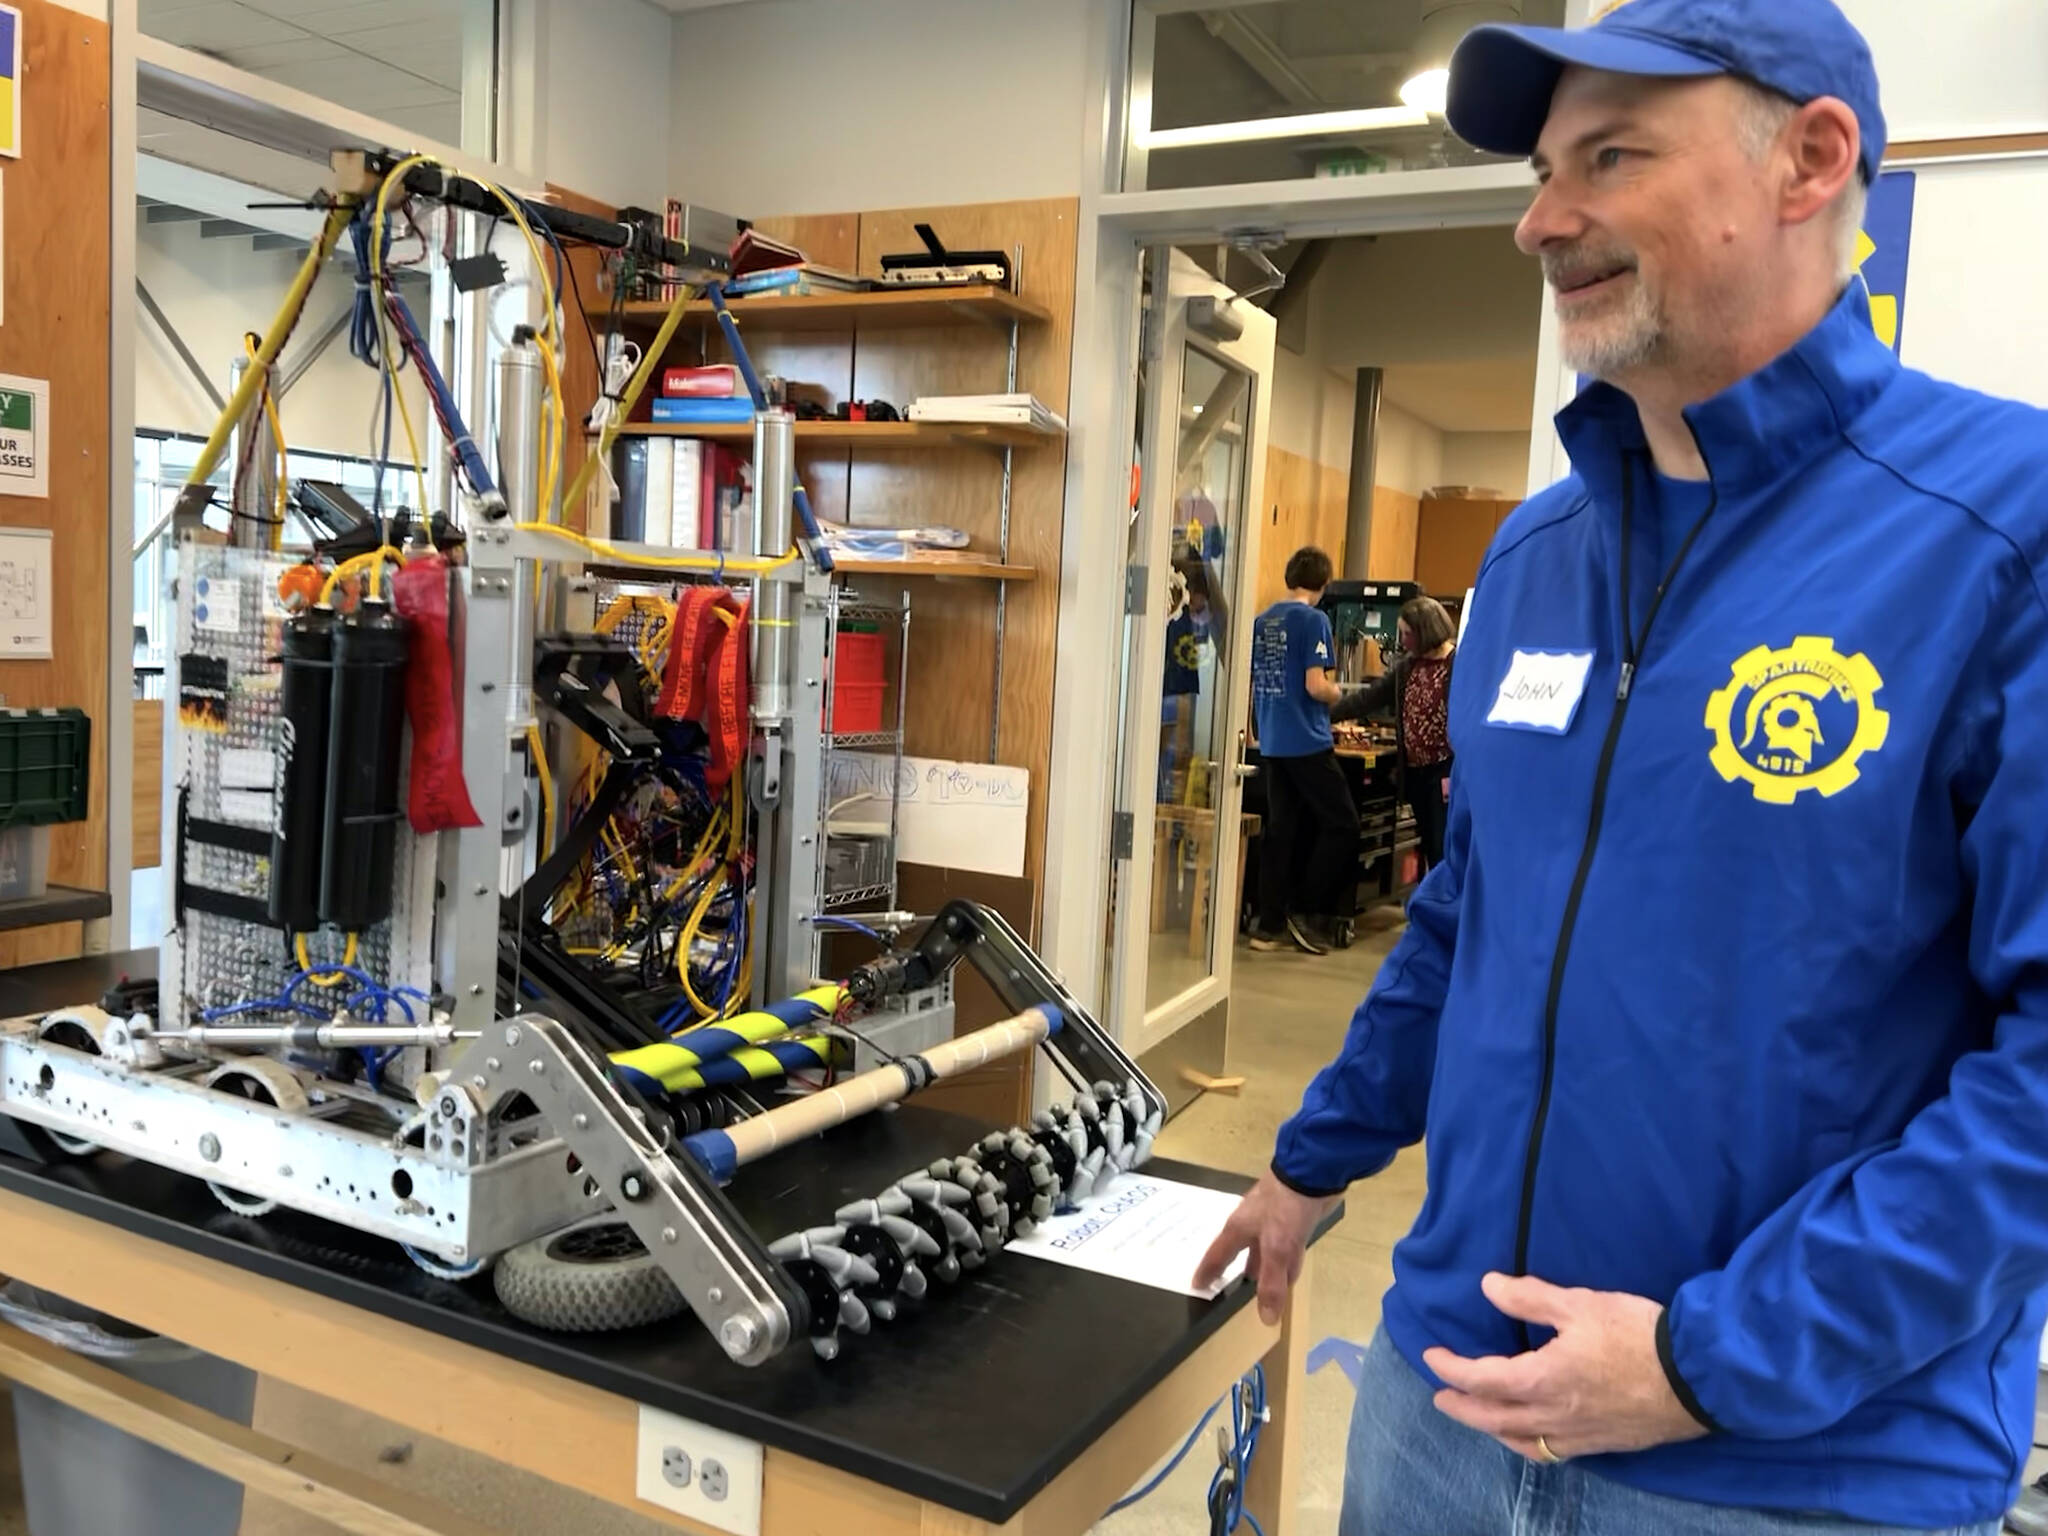 Professional mentor John Sachs introduces attendees to CHAOS, a robot built in 2019.